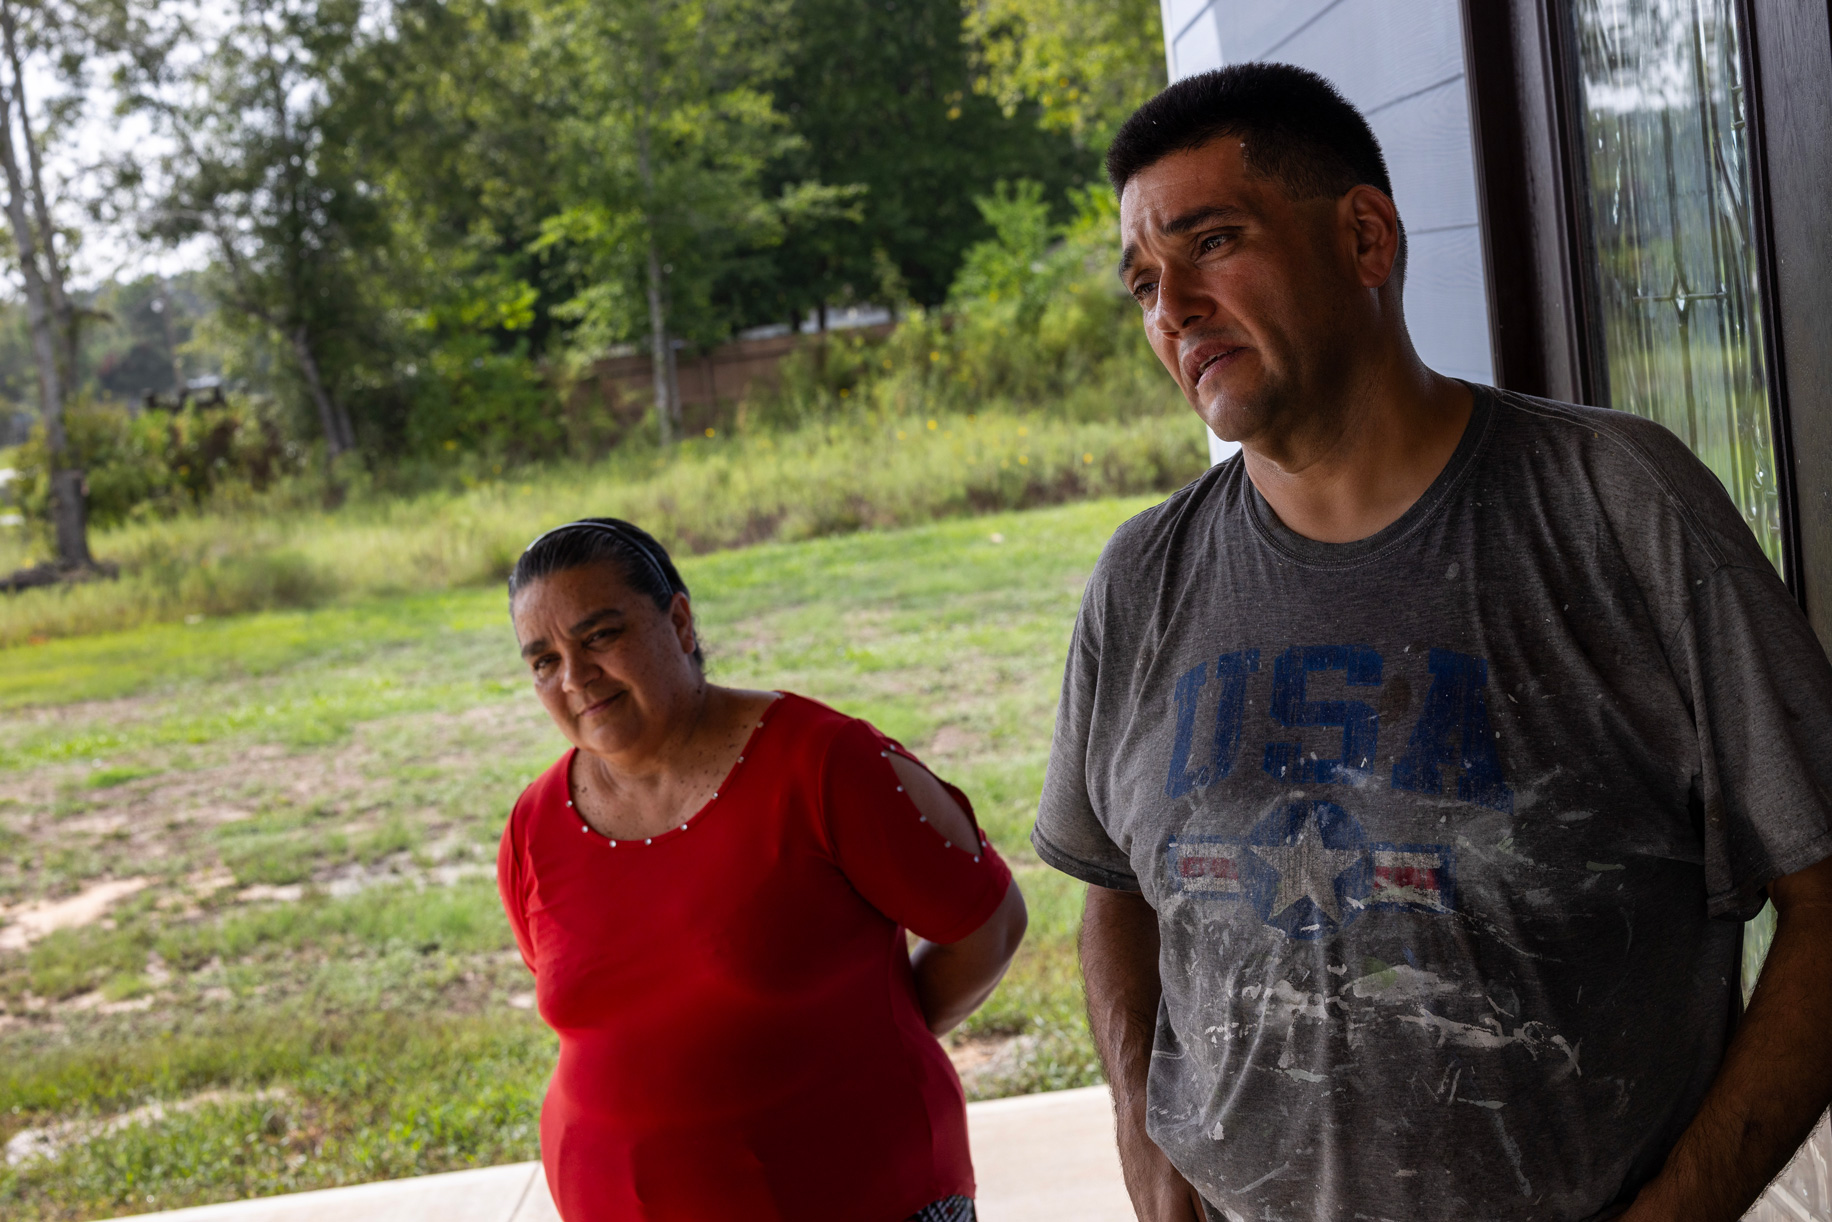 Timoteo Tarango, Pastor at Iglesia Pentecostal Fuego y Poder, at right, and his wife Melida Tarango speak about their experiences living in Colony Ridge. The couple bought three plots of land and used them to build a home for themselves and their church.